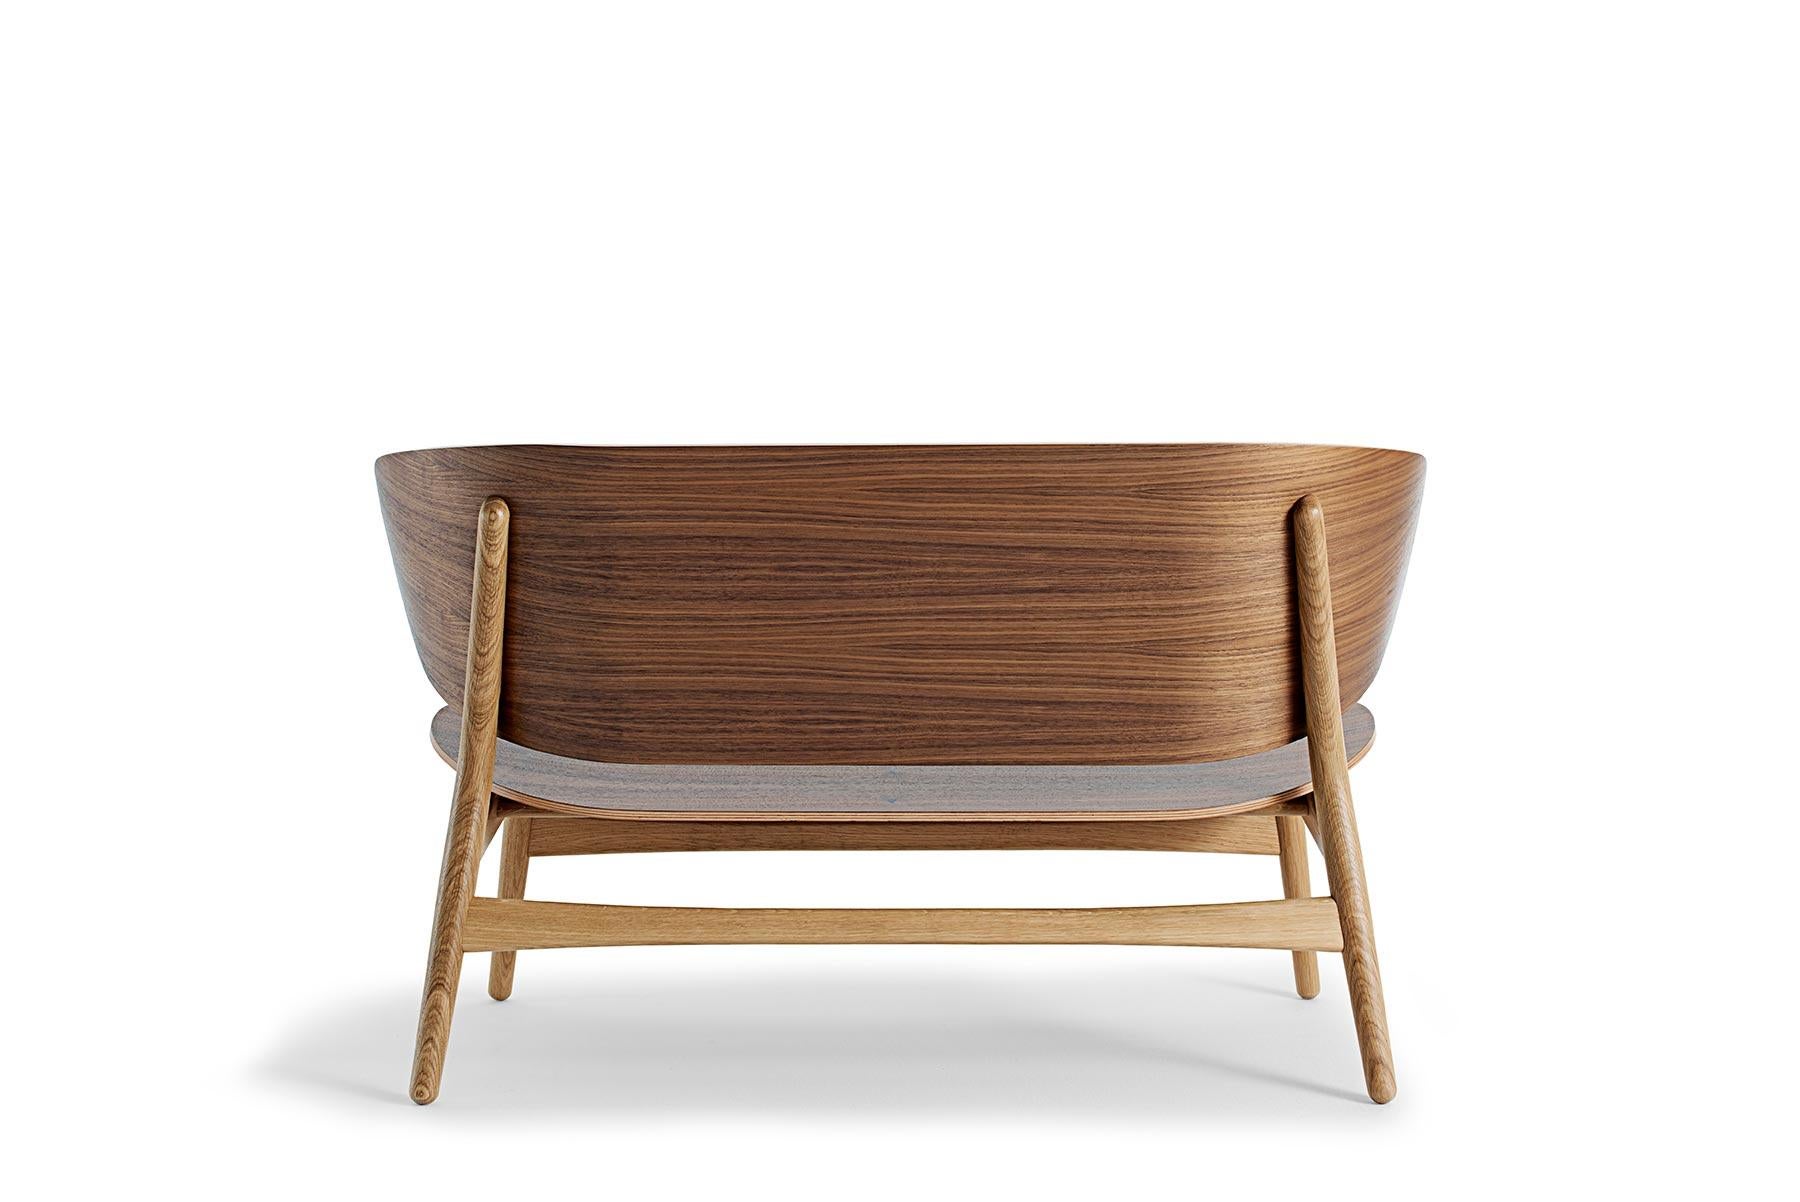 Designed by Hans Wegner in 1948, the GE 1936 shell bench has become an icon of modern design. Crafted in bent ply with a solid oak frame, the chair is hand built at GETAMA’s factory in Gedsted, Denmark by skilled cabinetmakers using traditional